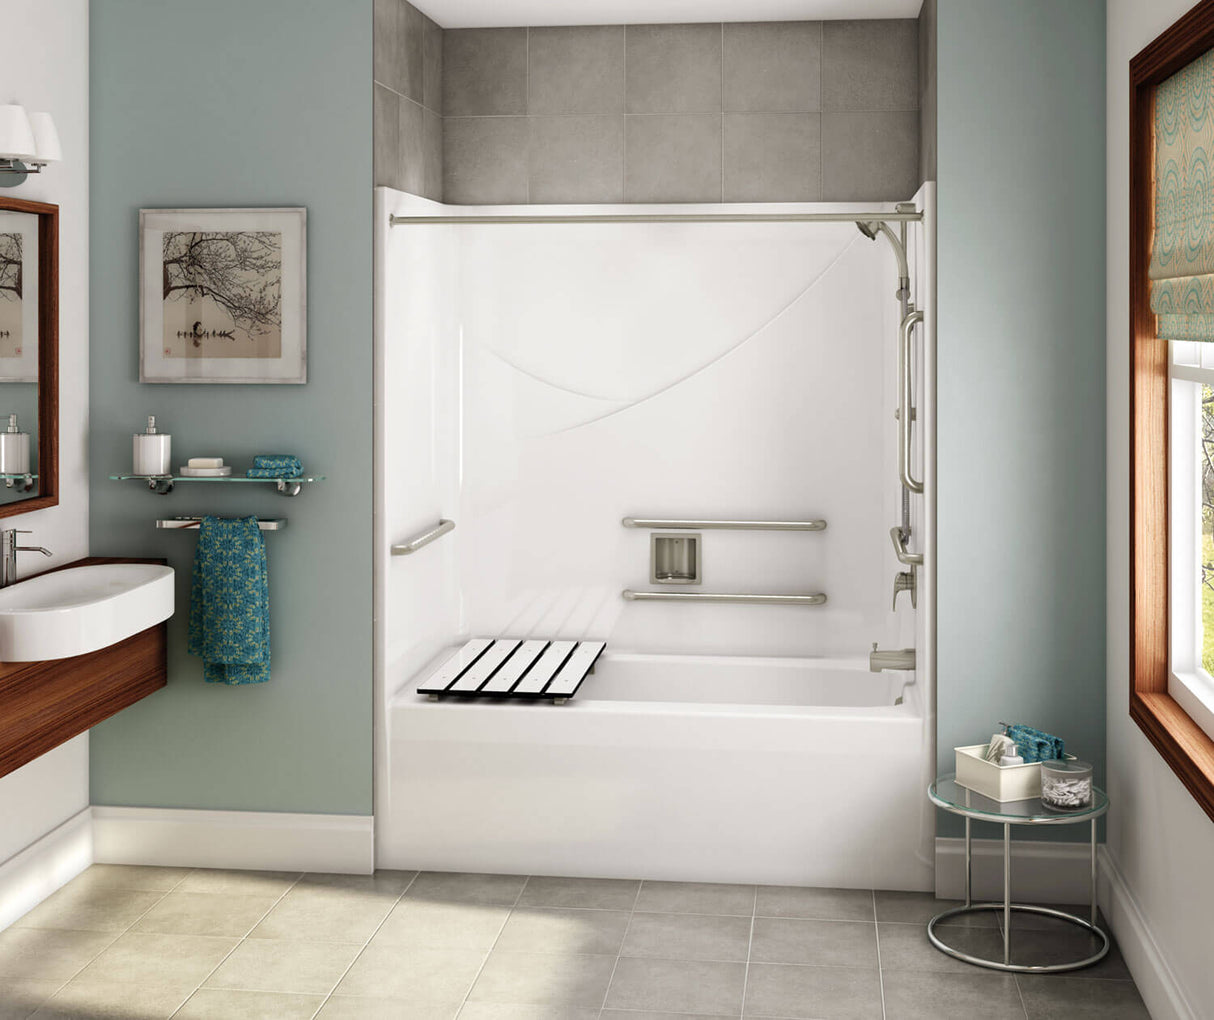 MAAX 106063-000-002-111 OPTS-6032 - ANSI Compliant AcrylX Alcove Right-Hand Drain One-Piece Tub Shower in White